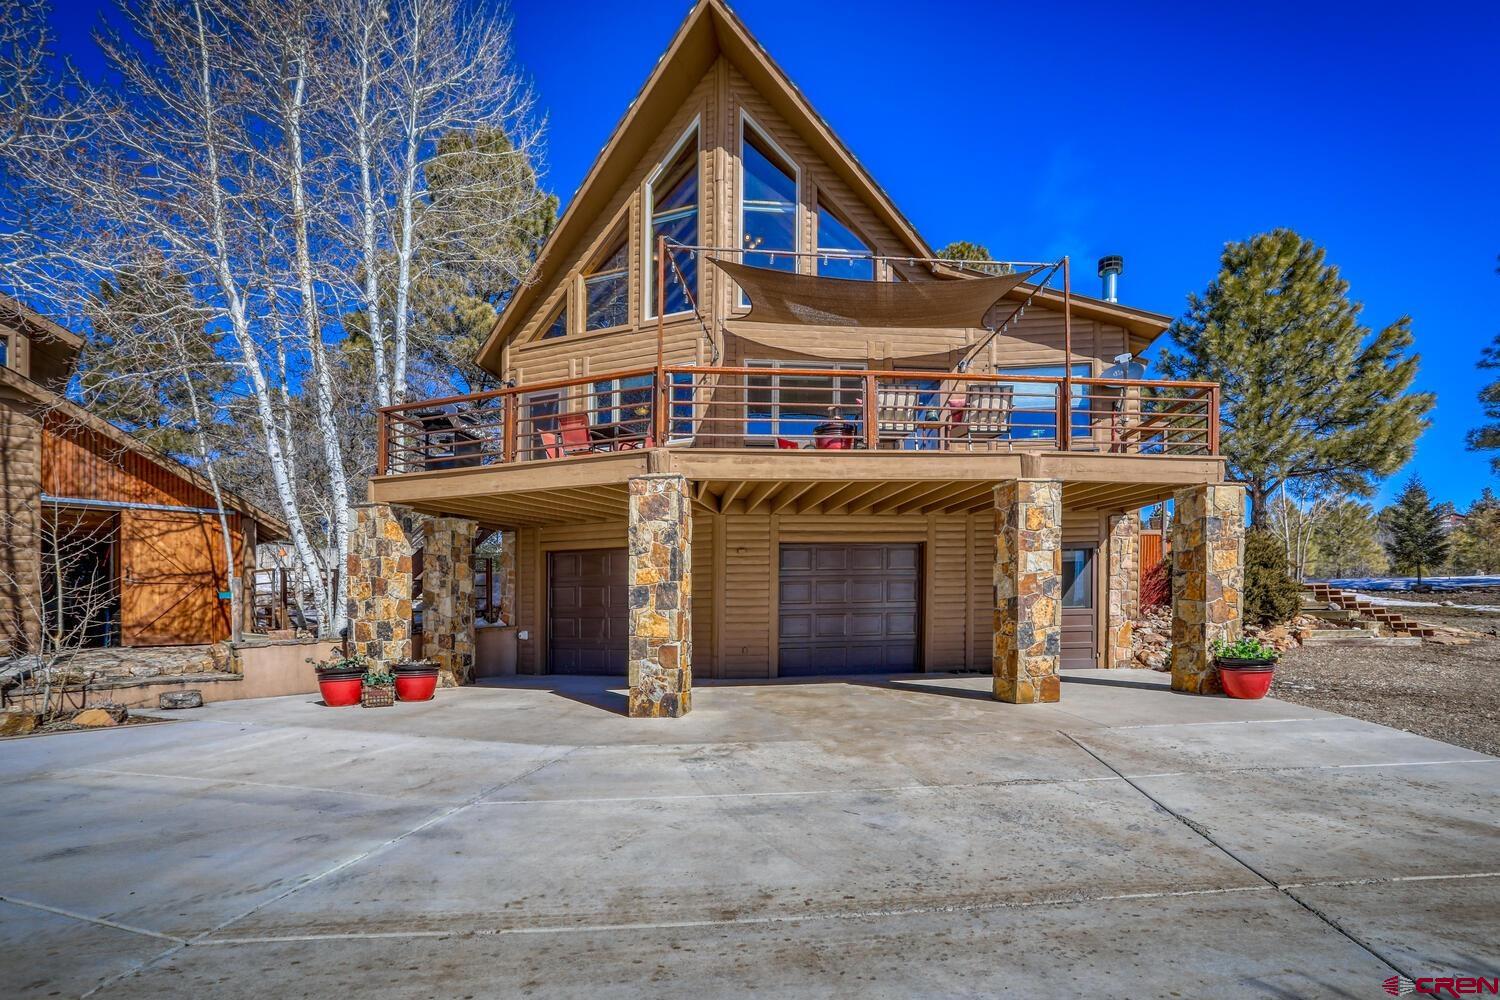 108 Creekside Place, Pagosa Springs, CO 81147 Listing Photo  2